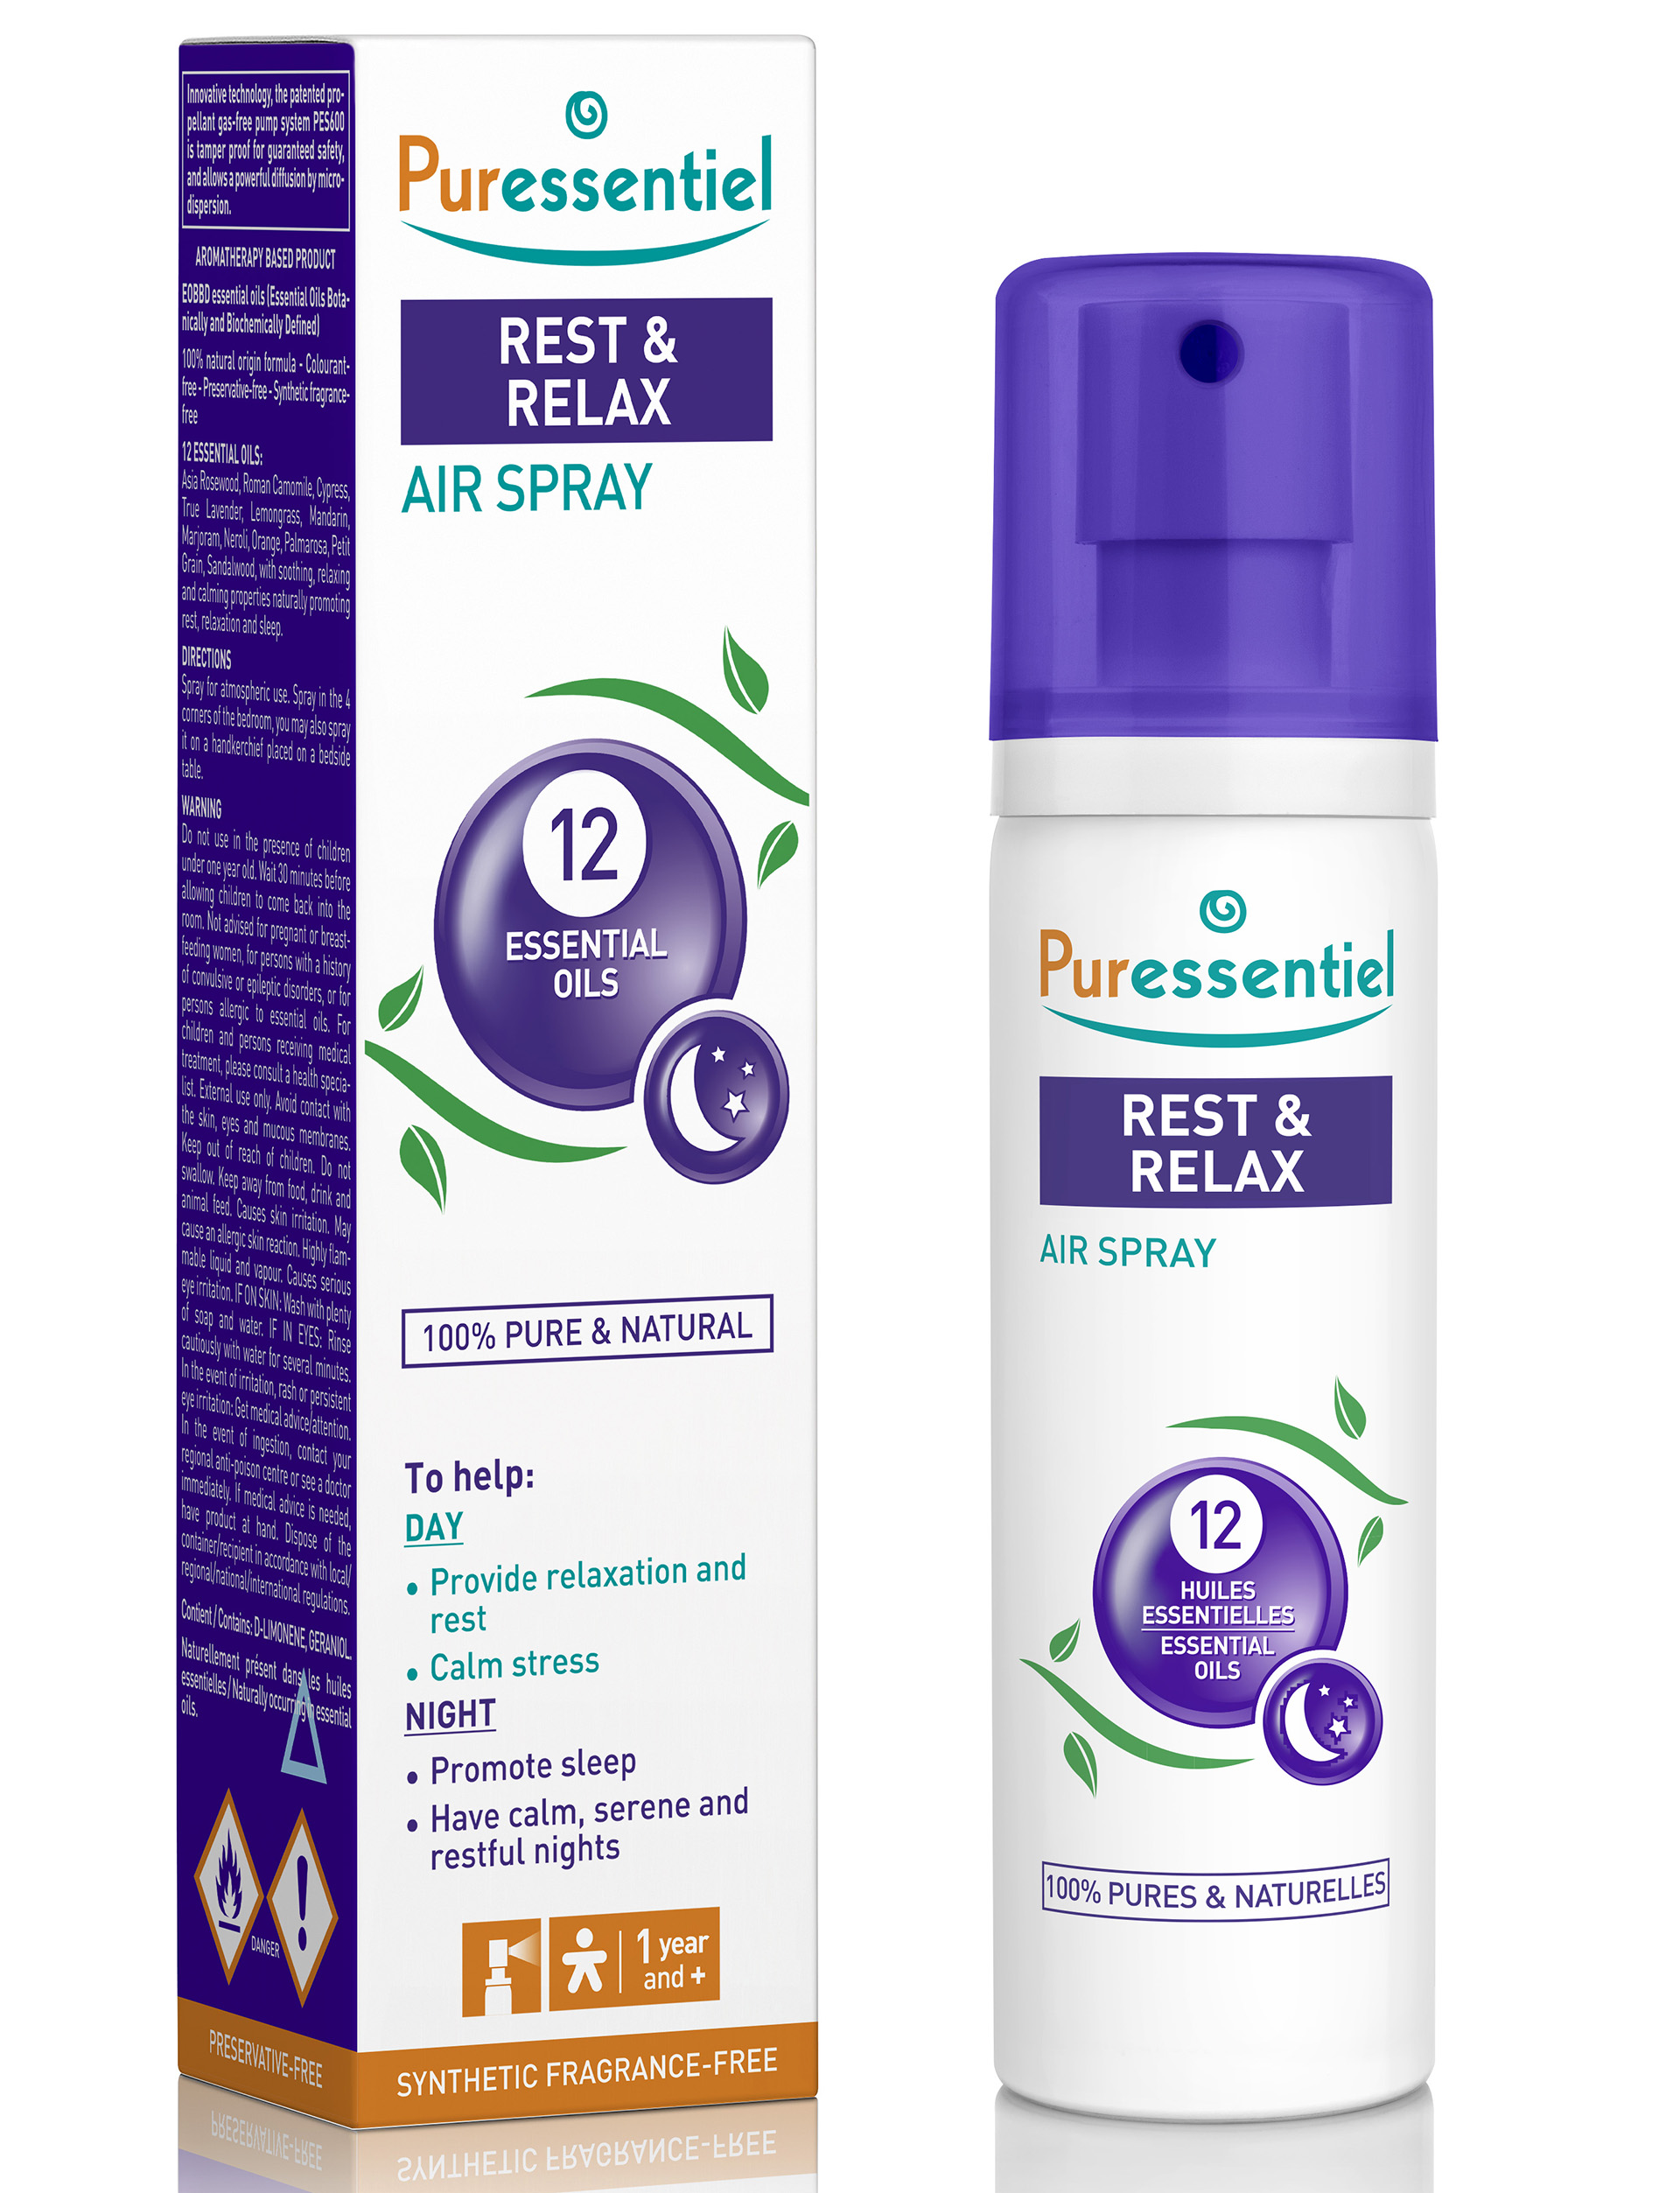 Puressential Rest Relax Air Spray